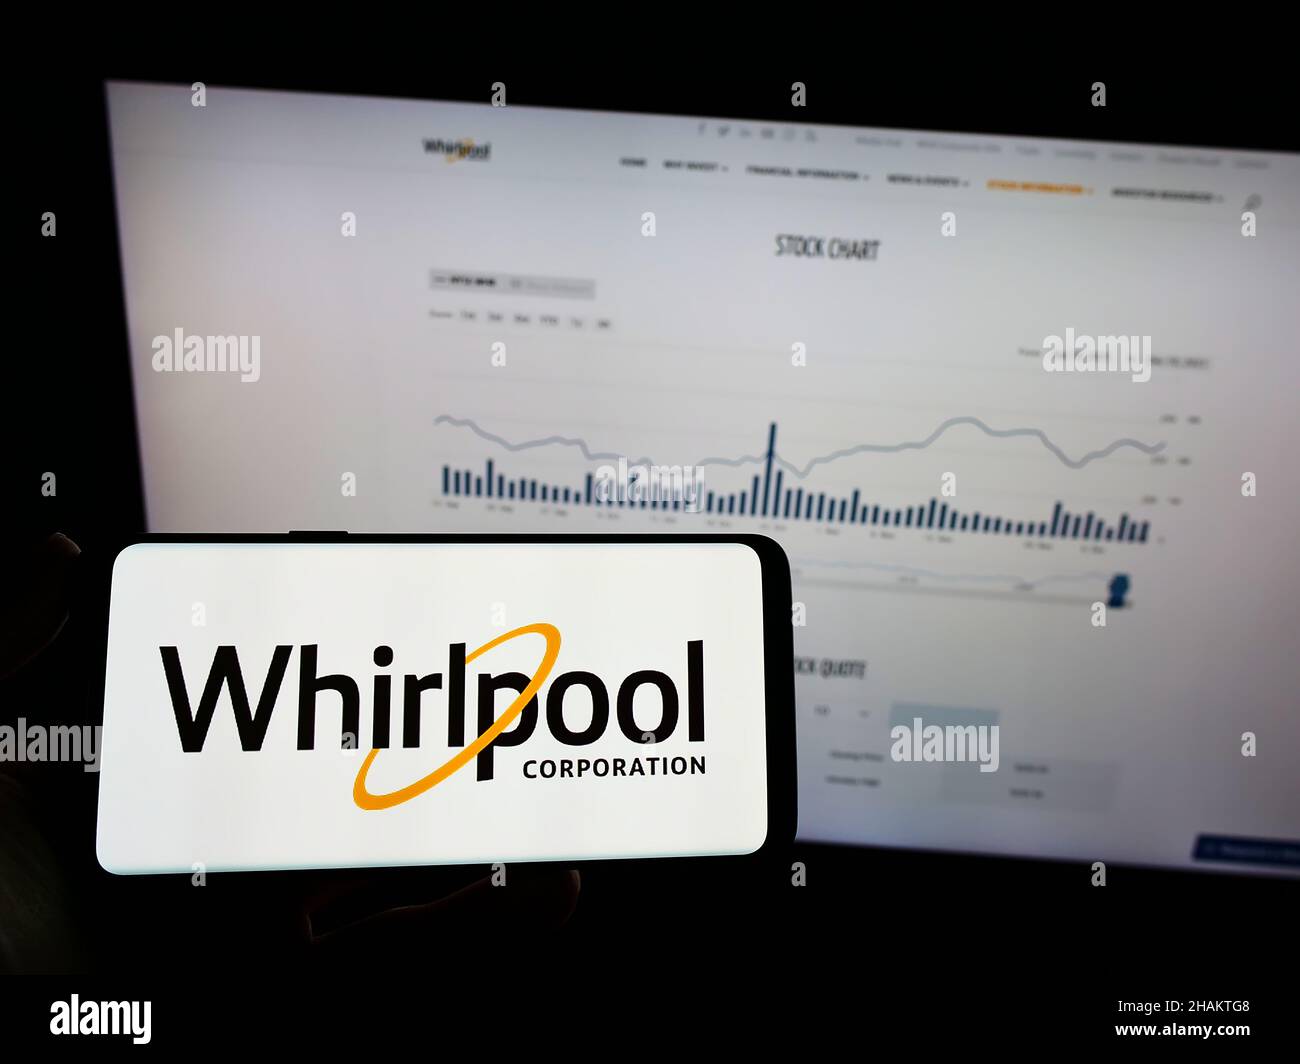 Person holding mobile phone with logo of US home appliances company Whirlpool Corporation on screen in front of web page. Focus on phone display. Stock Photo